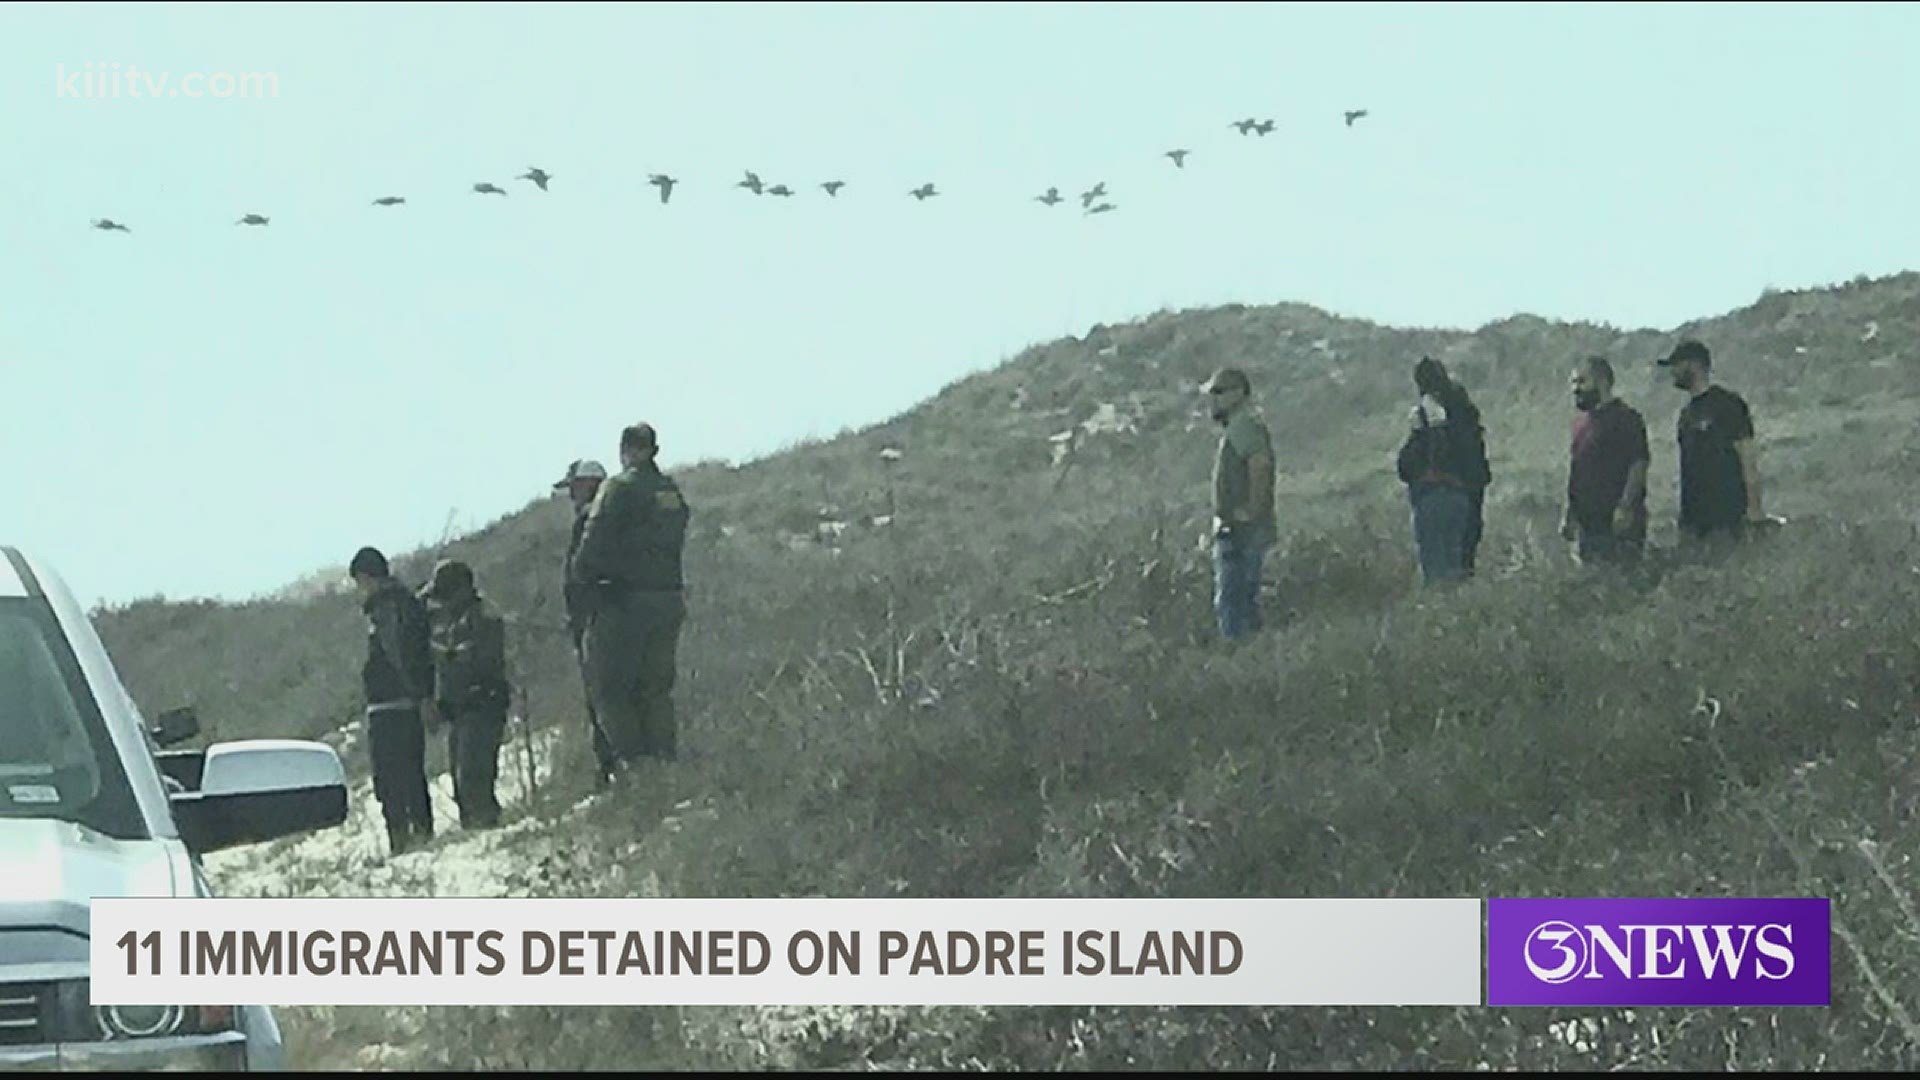 It began with what law enforcement officials say was a 'suspicious vehicle' seen at the Padre Island National Sea Shore.